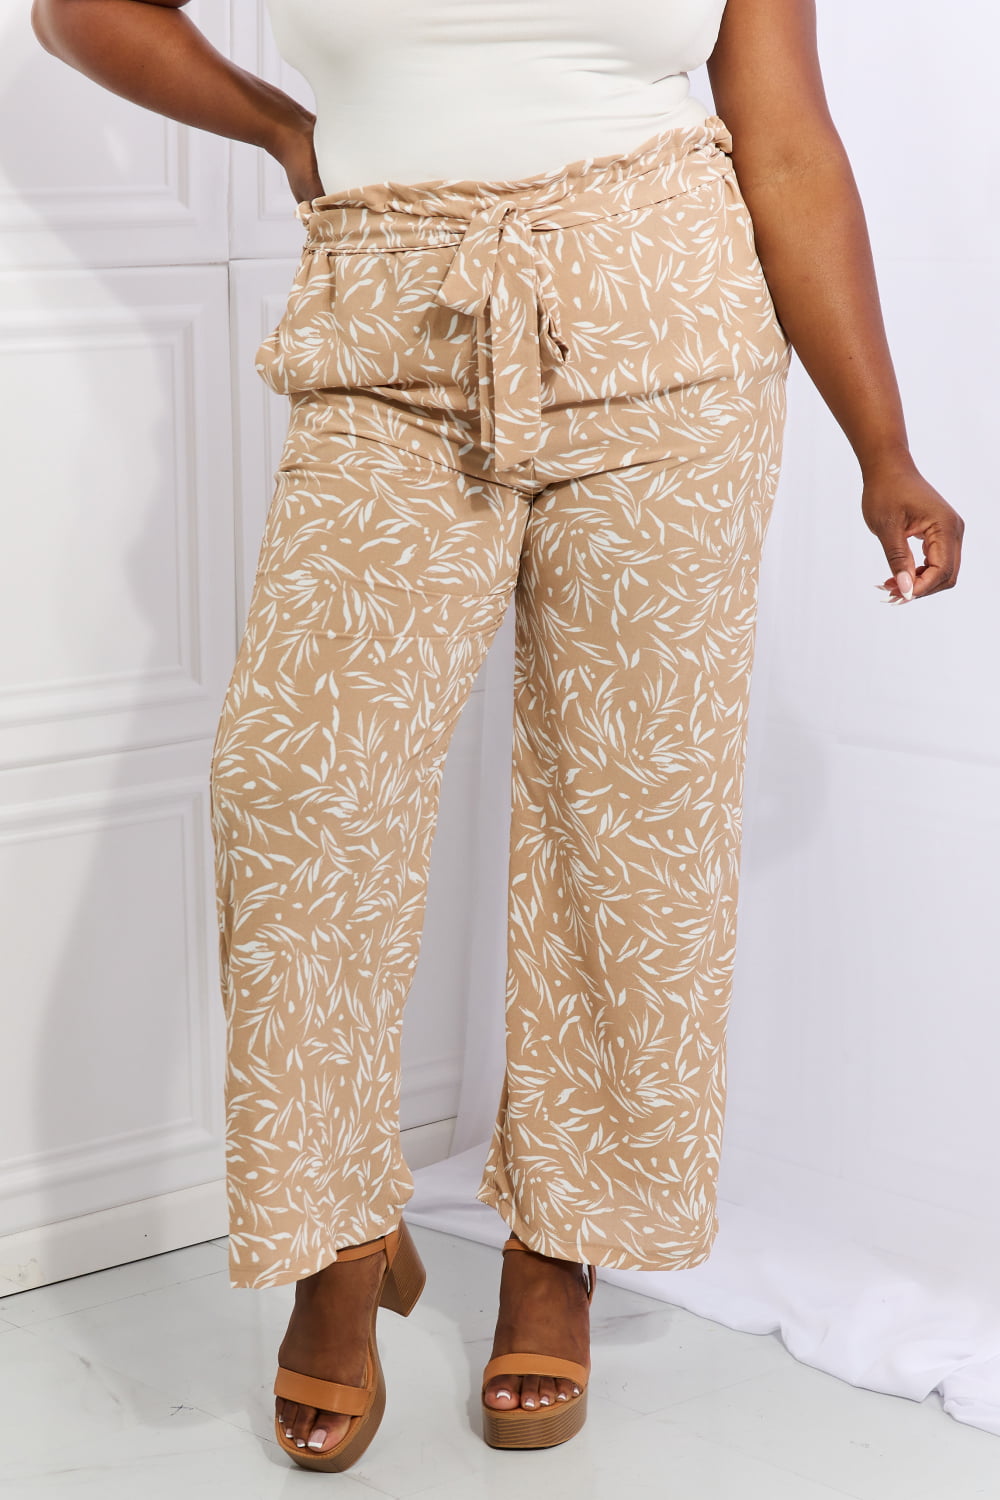 Right Angle Full Size Geometric Printed Pants in Tan - Bottoms - Pants - 7 - 2024